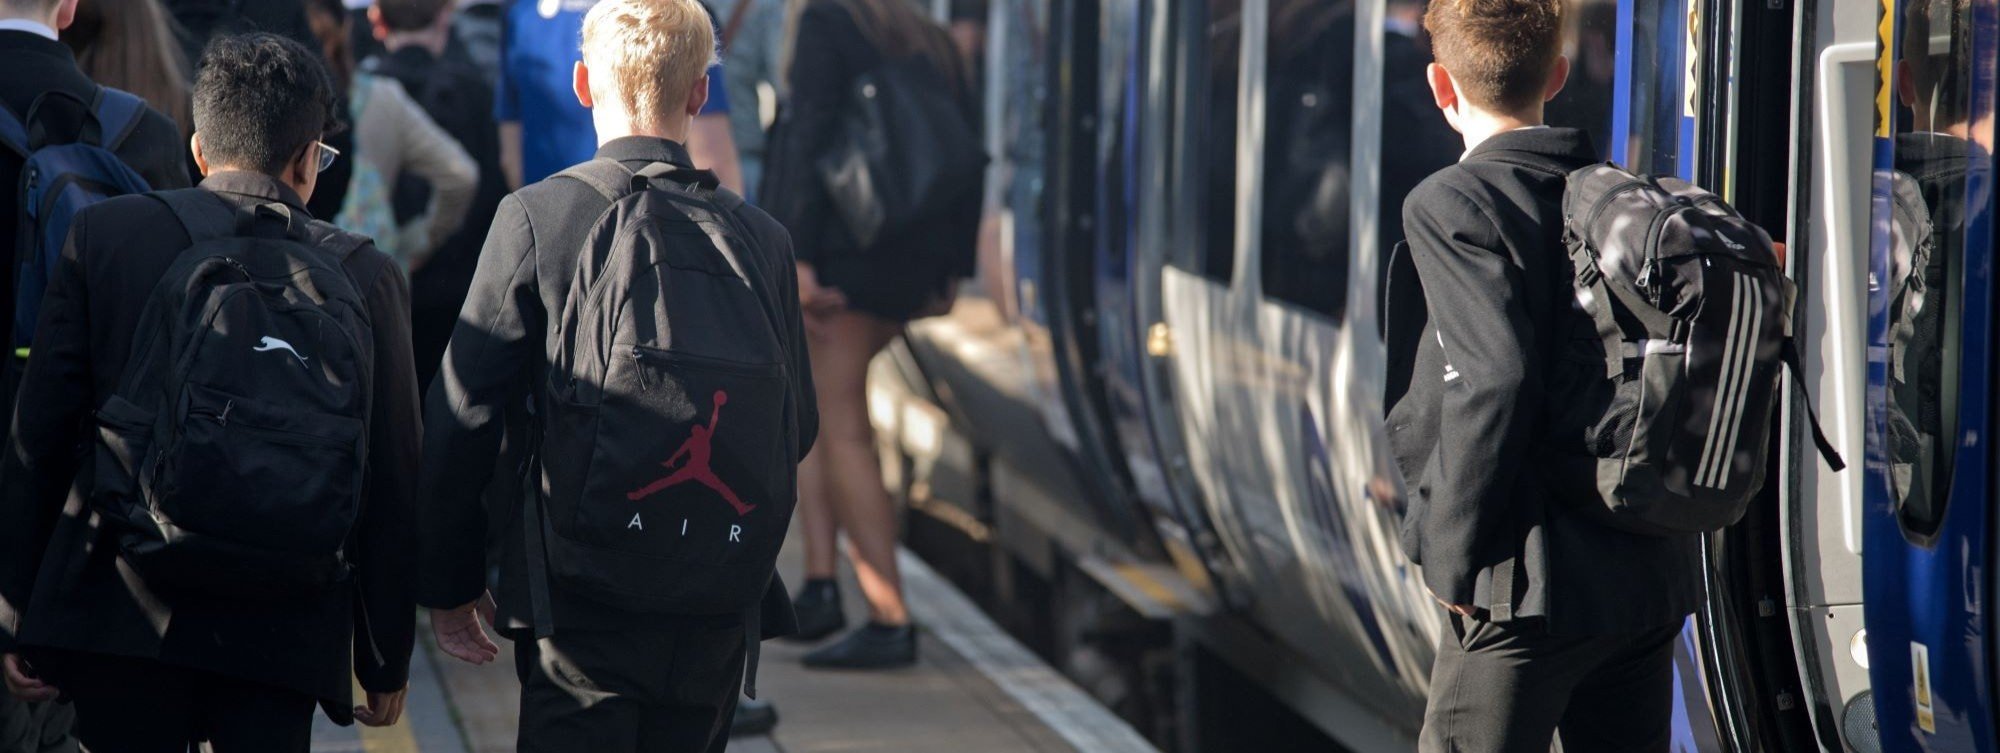 image-shows-secondary-school-students-commuting-to-school